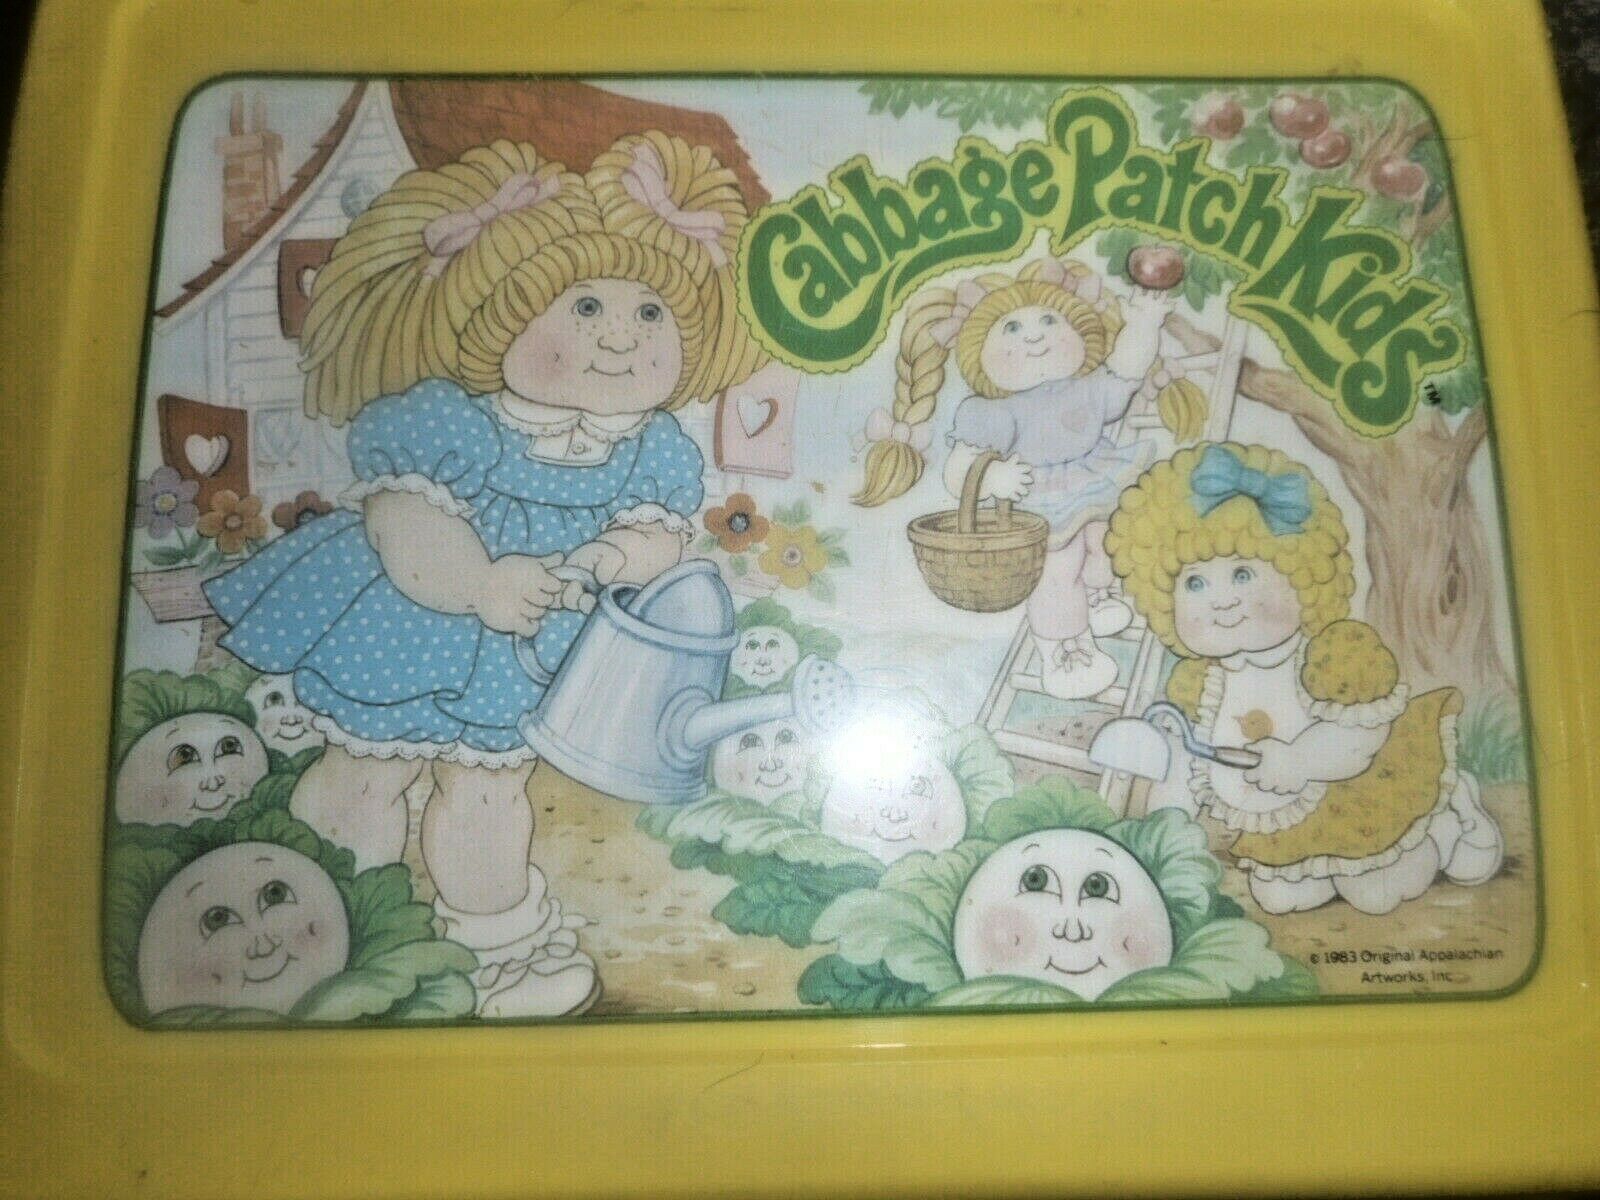 Vintage Metal Lunch Boxes, Vintage 1983 Cabbage Patch Kids Metal Lunch Box